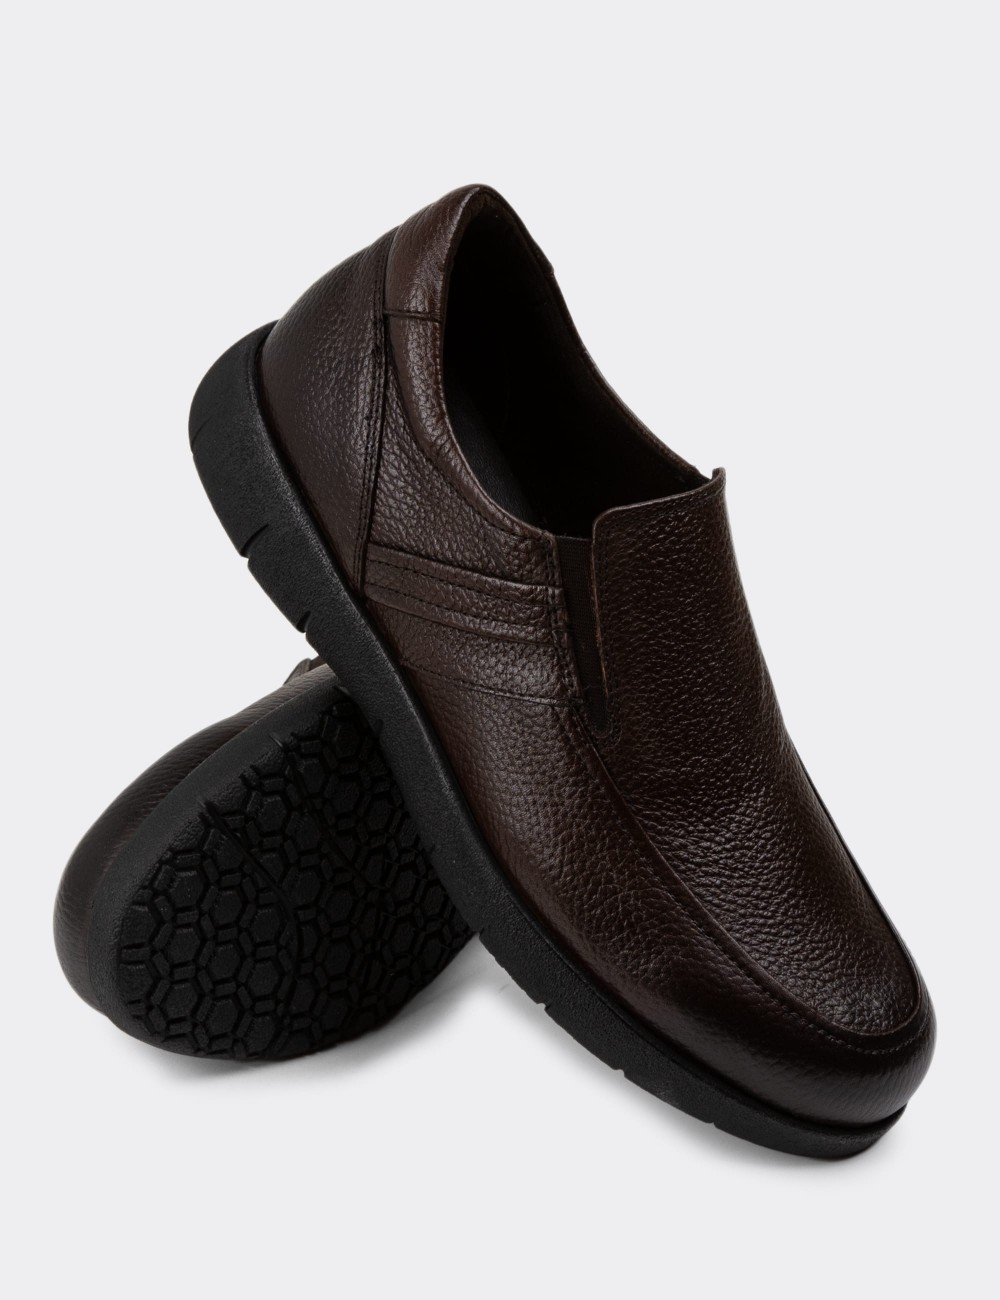 Brown Leather Loafers Shoes - 01946MKHVC01